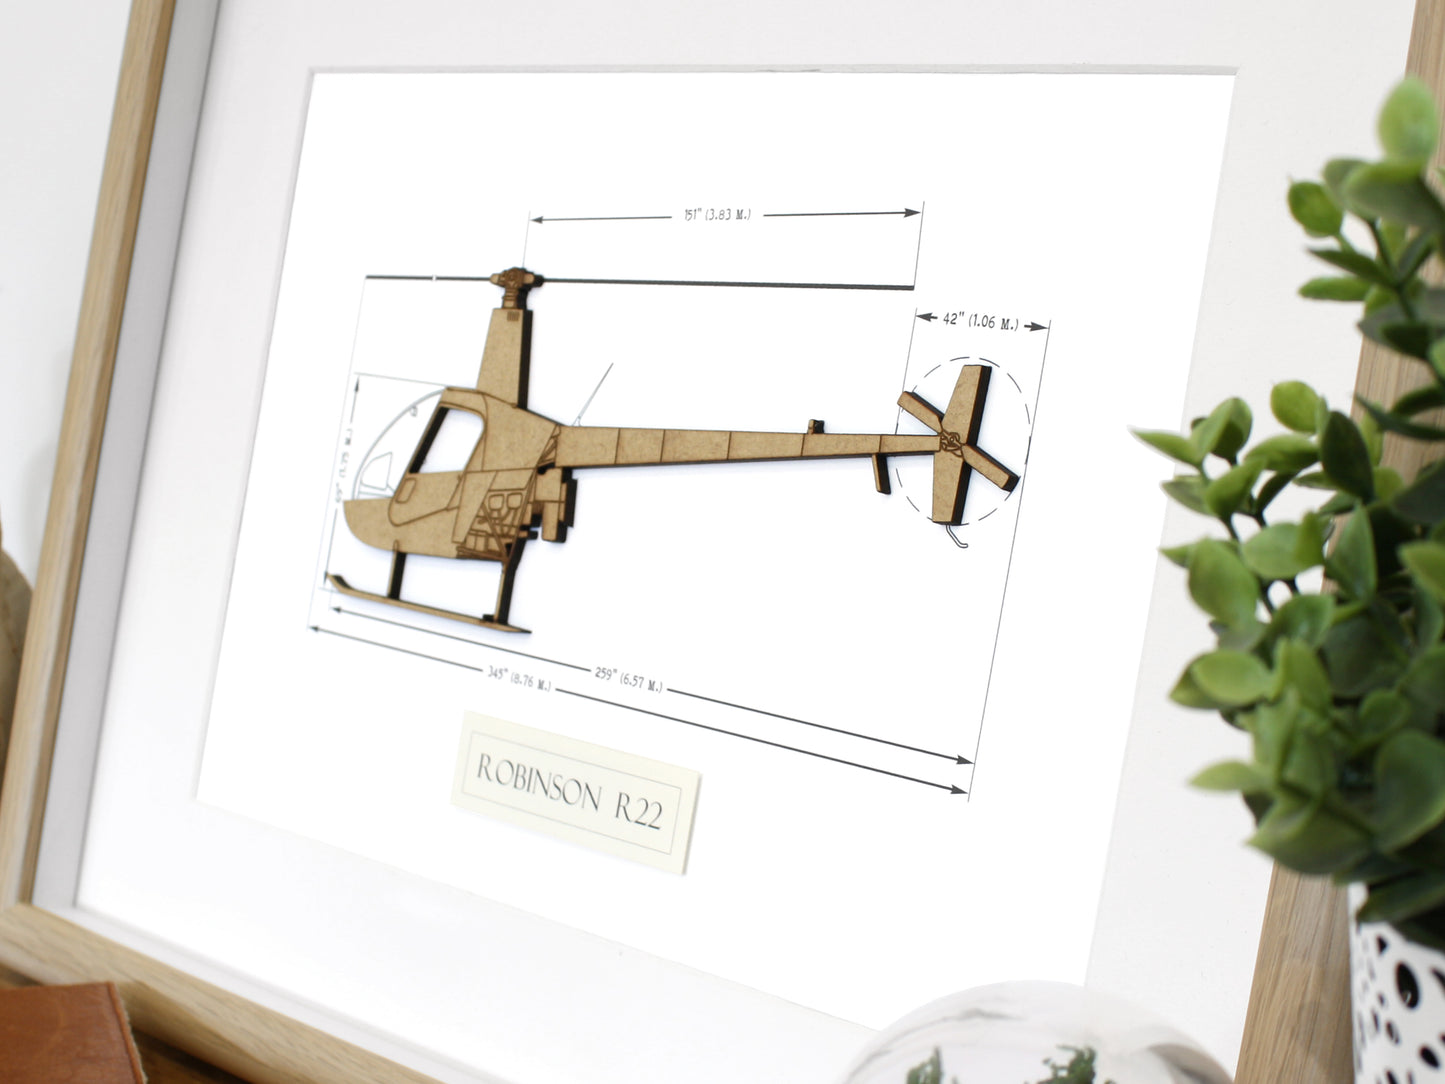 Robinson R22 helicopter gifts